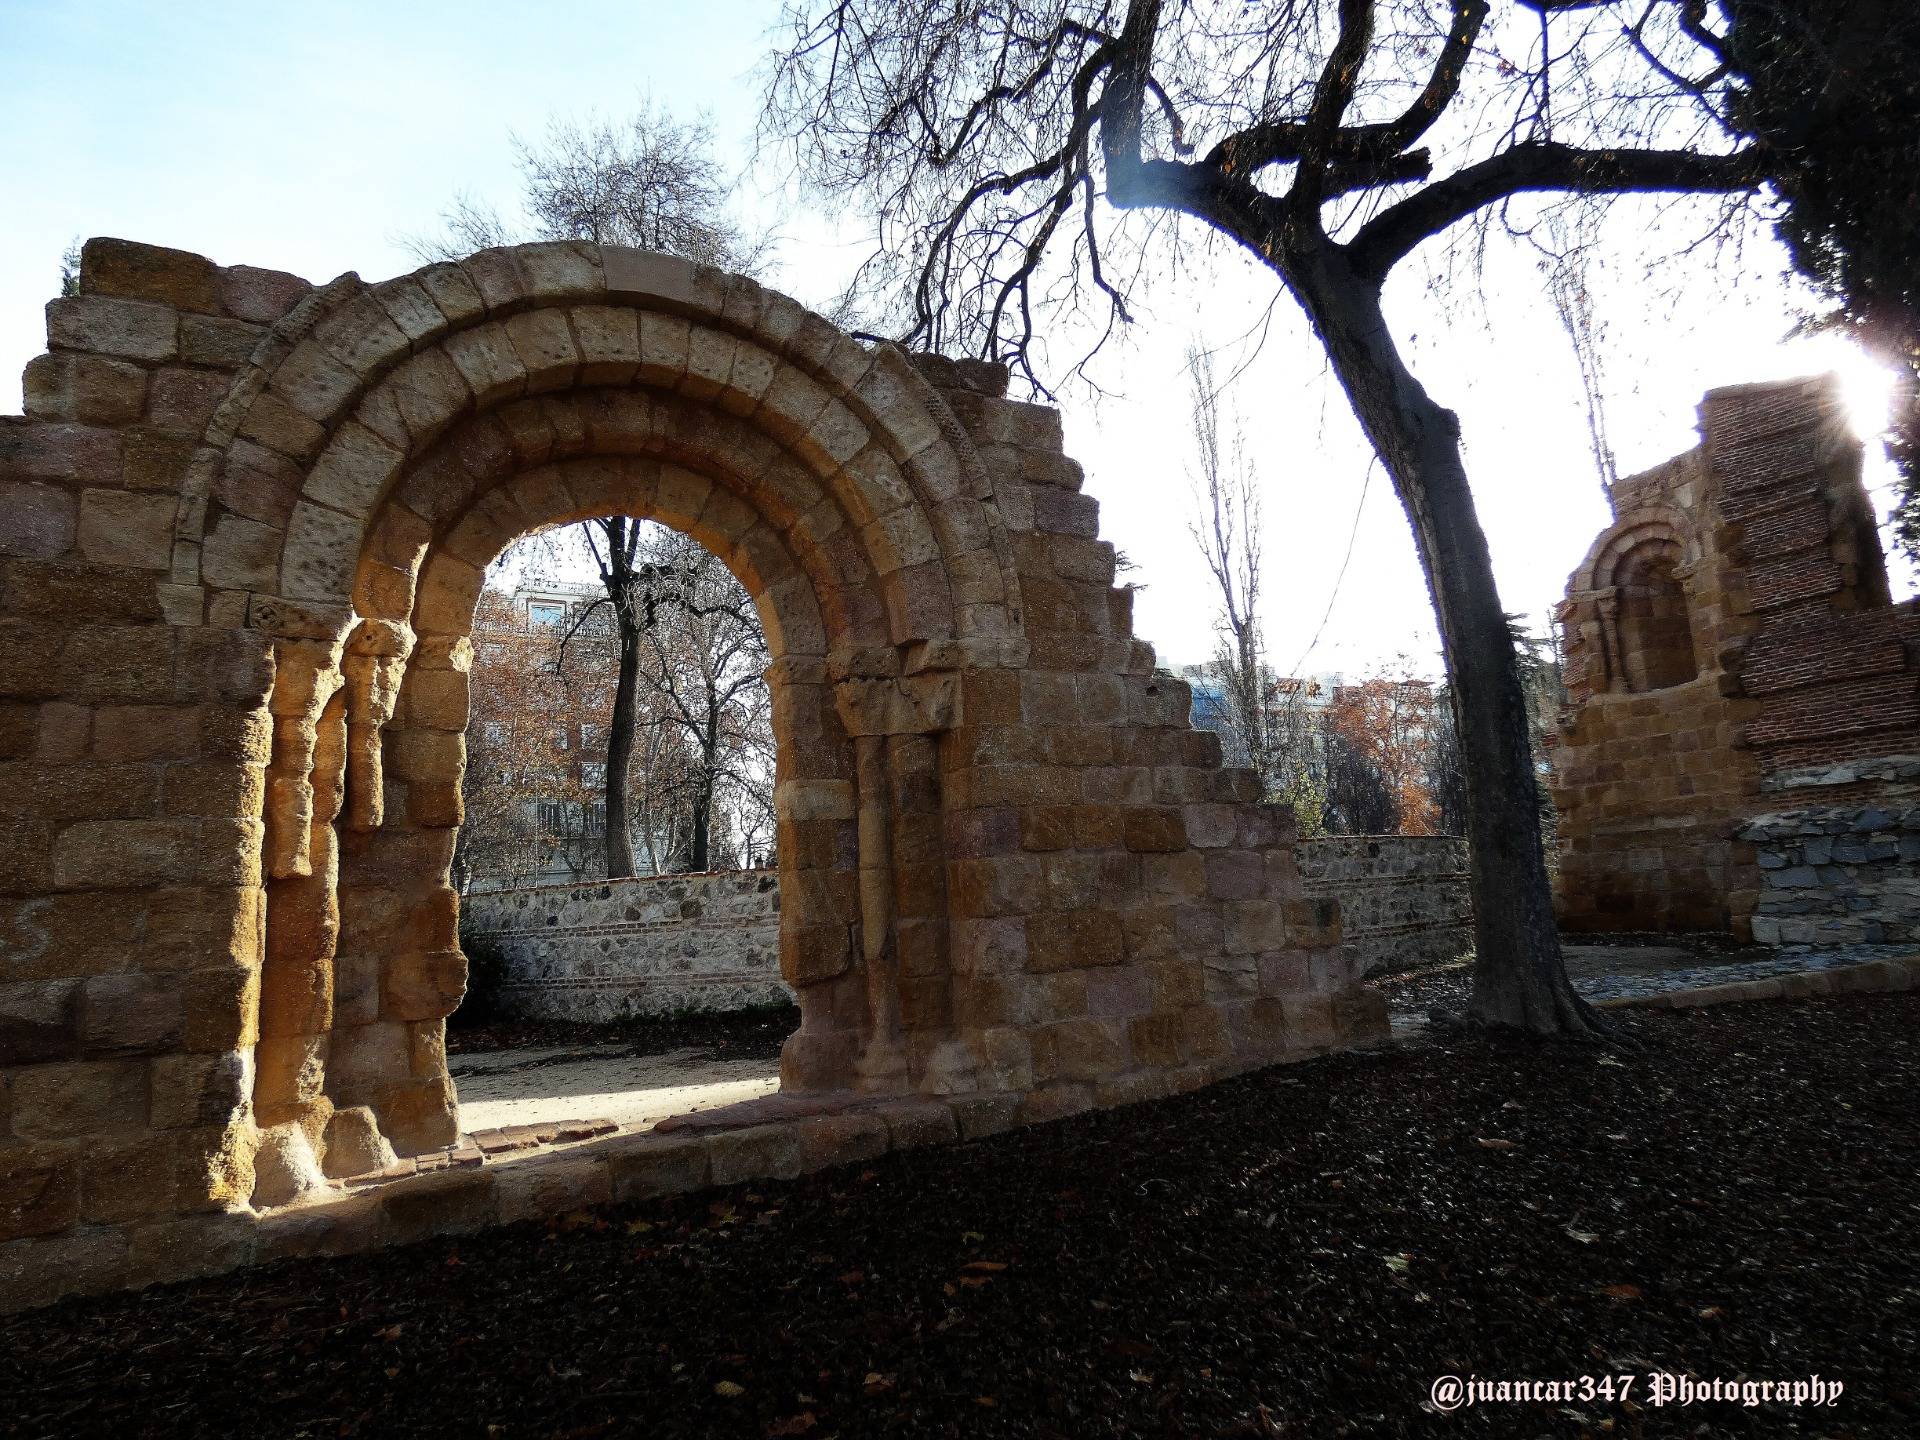 Romanesque of Ávila in Madrid: the ruins of San Isidoro